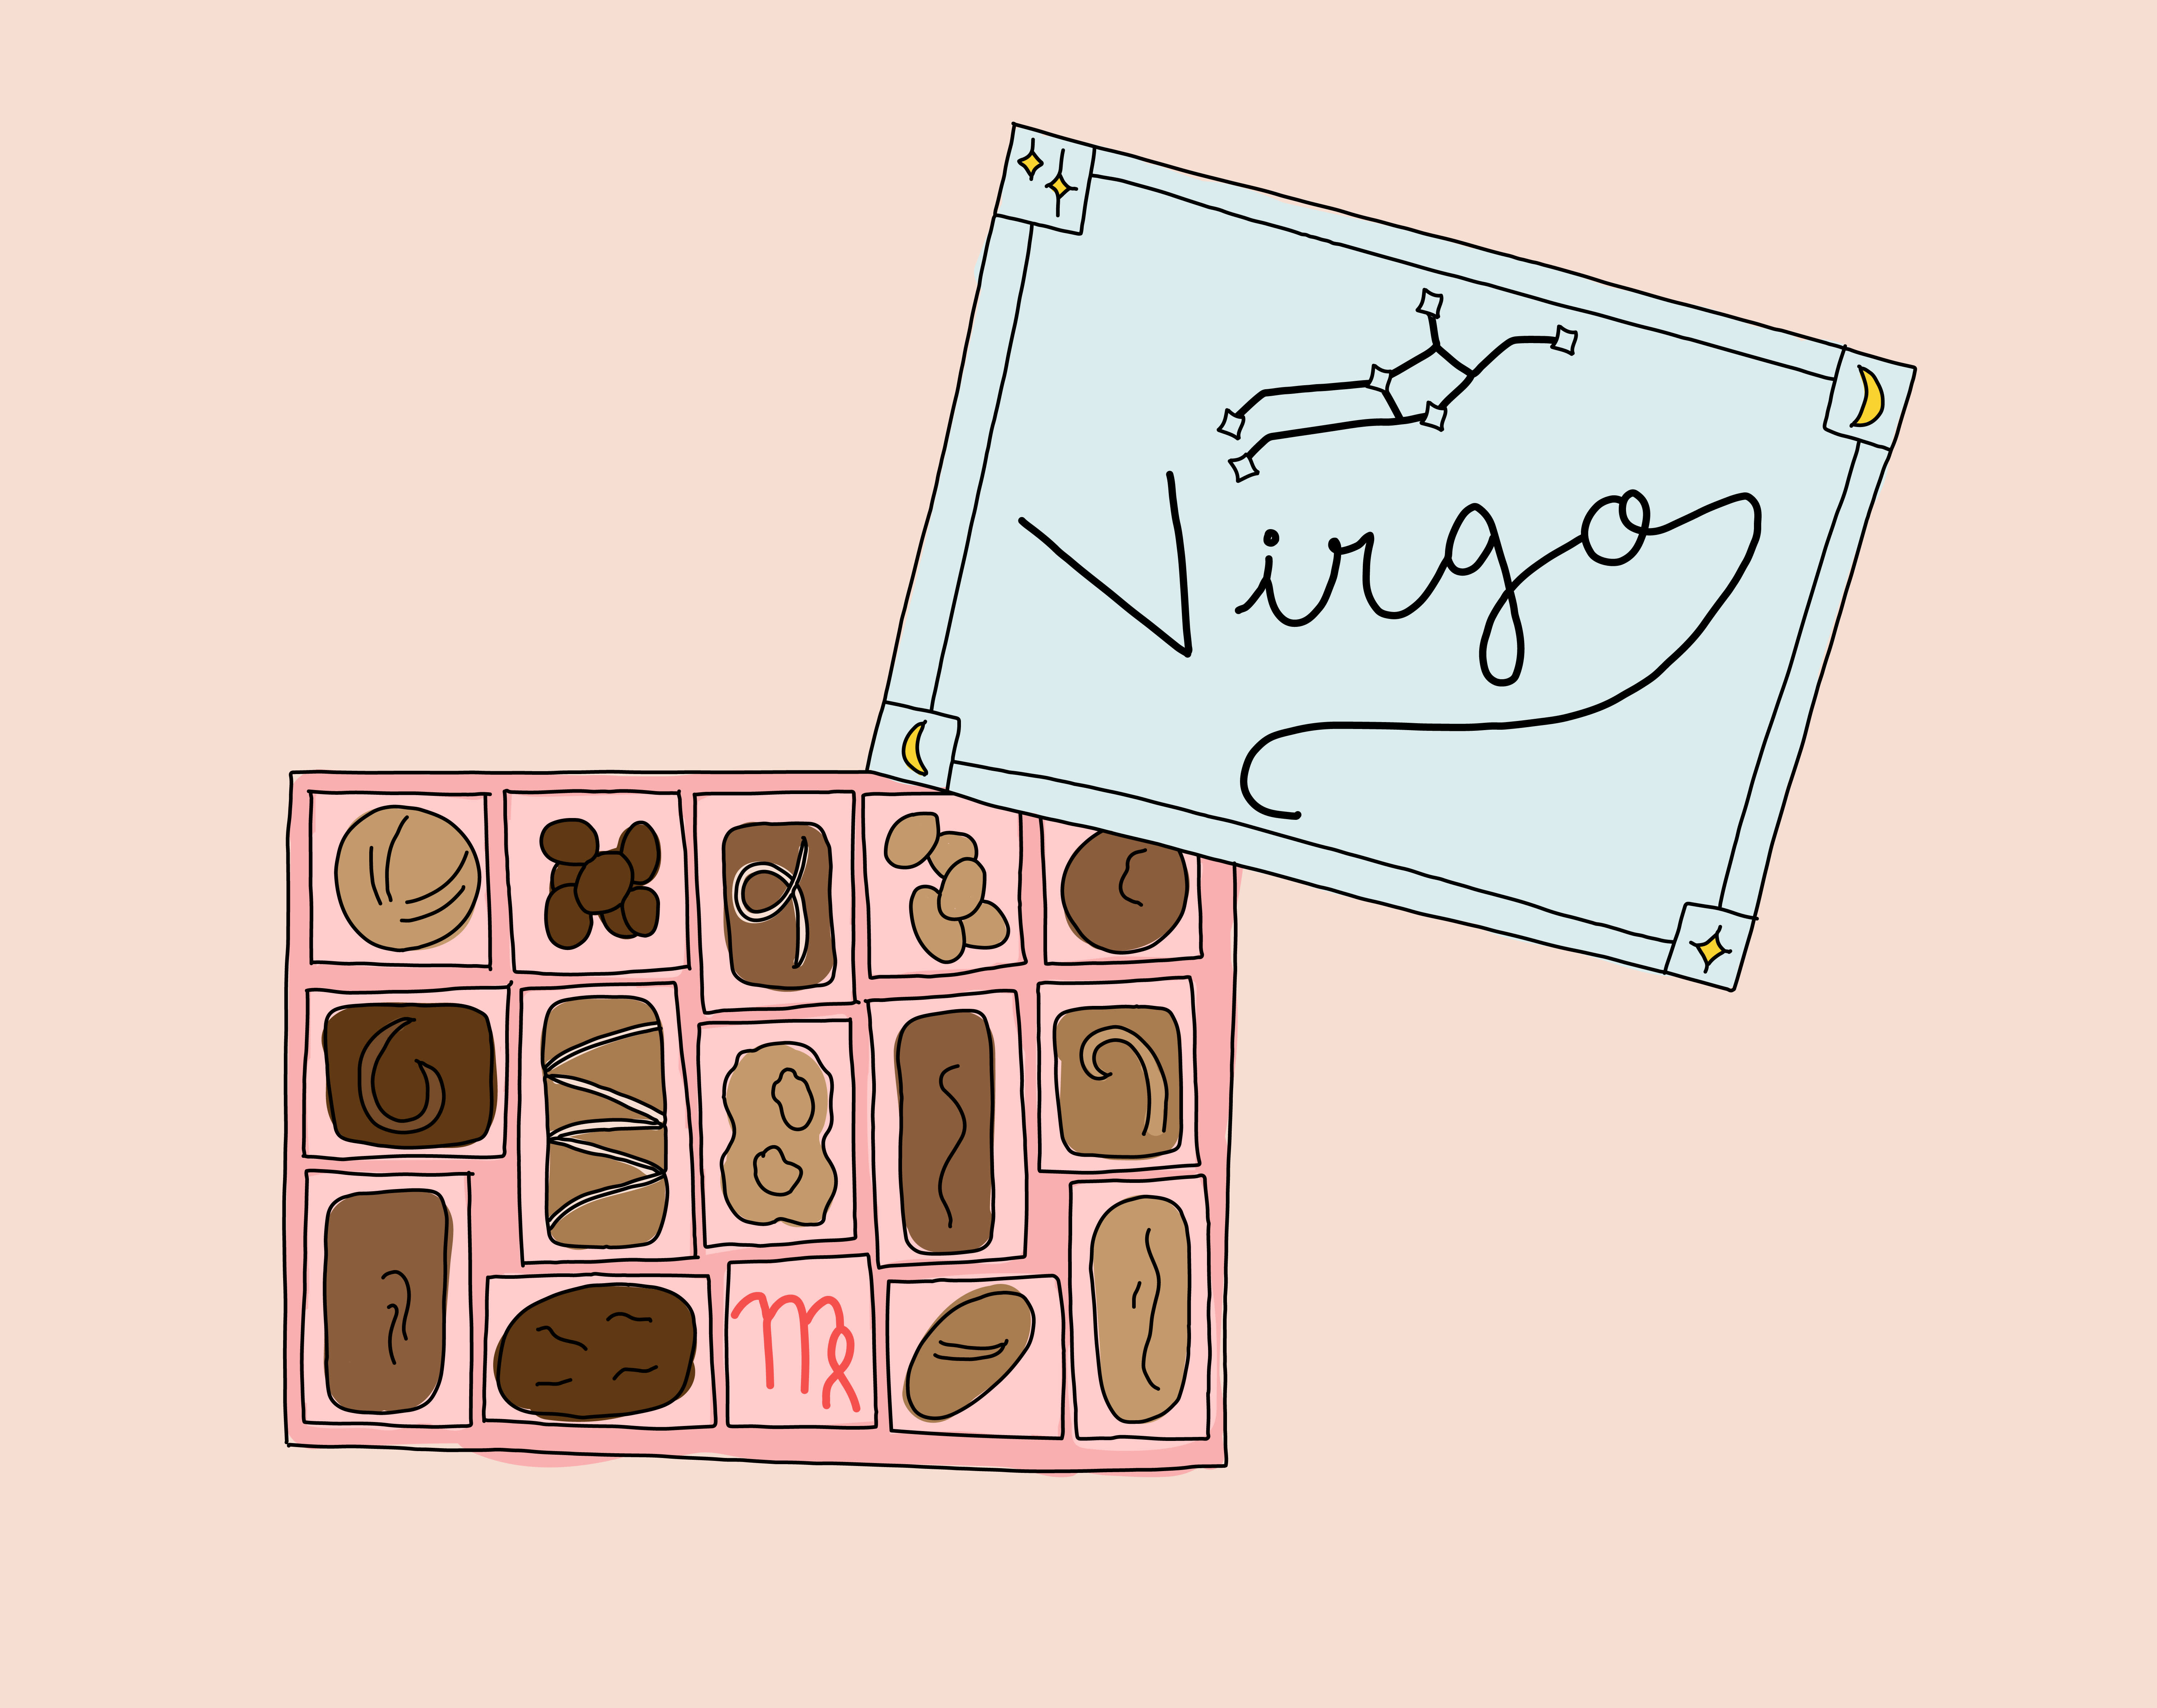 A Virgo zodiac sign chocolate box with the chocolate pieces laid out next to it - Virgo